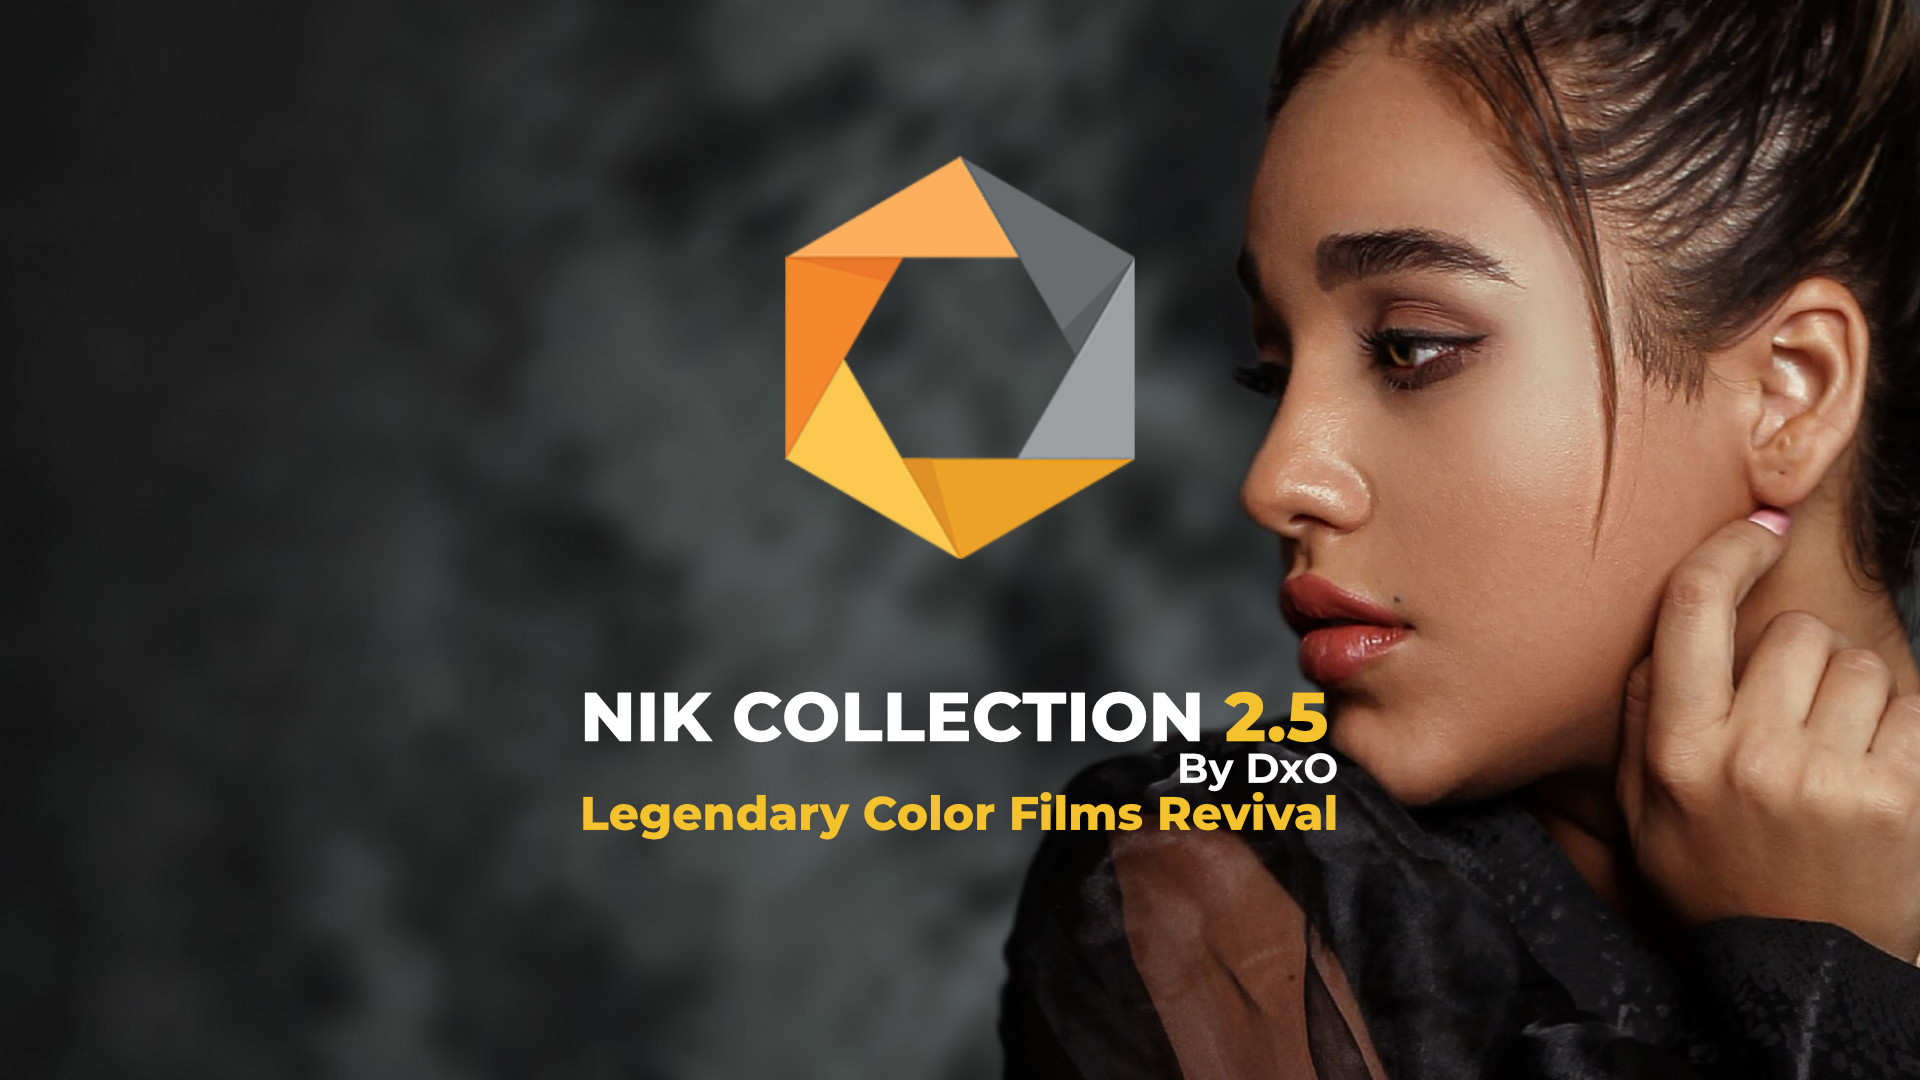 nik collection by dxo torrent